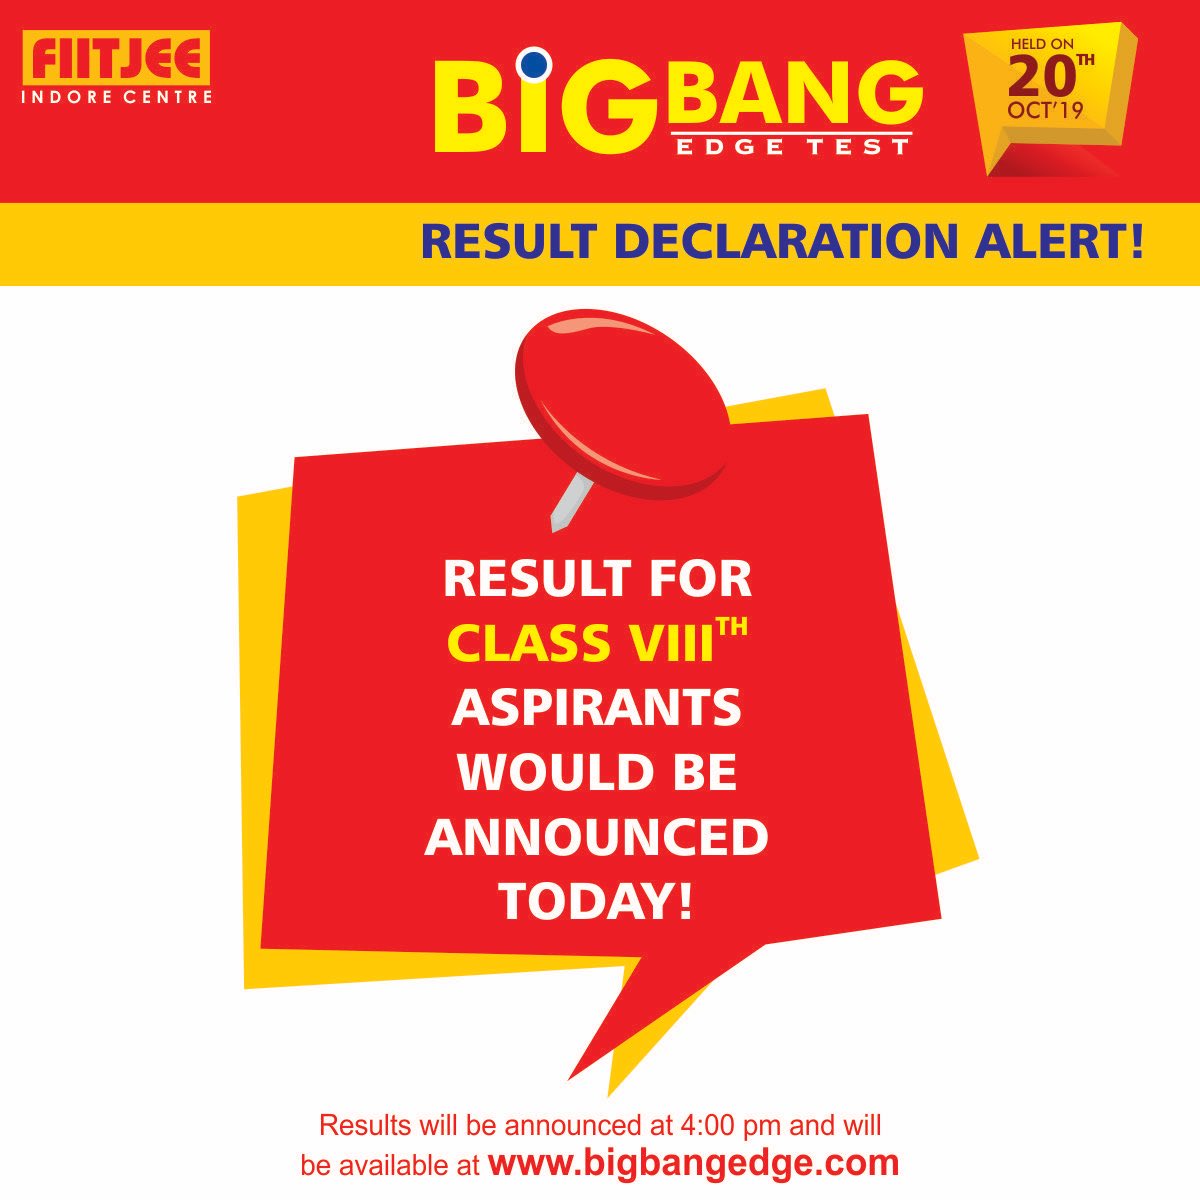 -Big Bang Edge Test 2019 | Update-
Result for class 8th aspirants would be announced today at 4 PM, it will be available at bigbangedge.com. All the best 👍
#BBET2019 #Result #Class8th #FIITJEEIndore